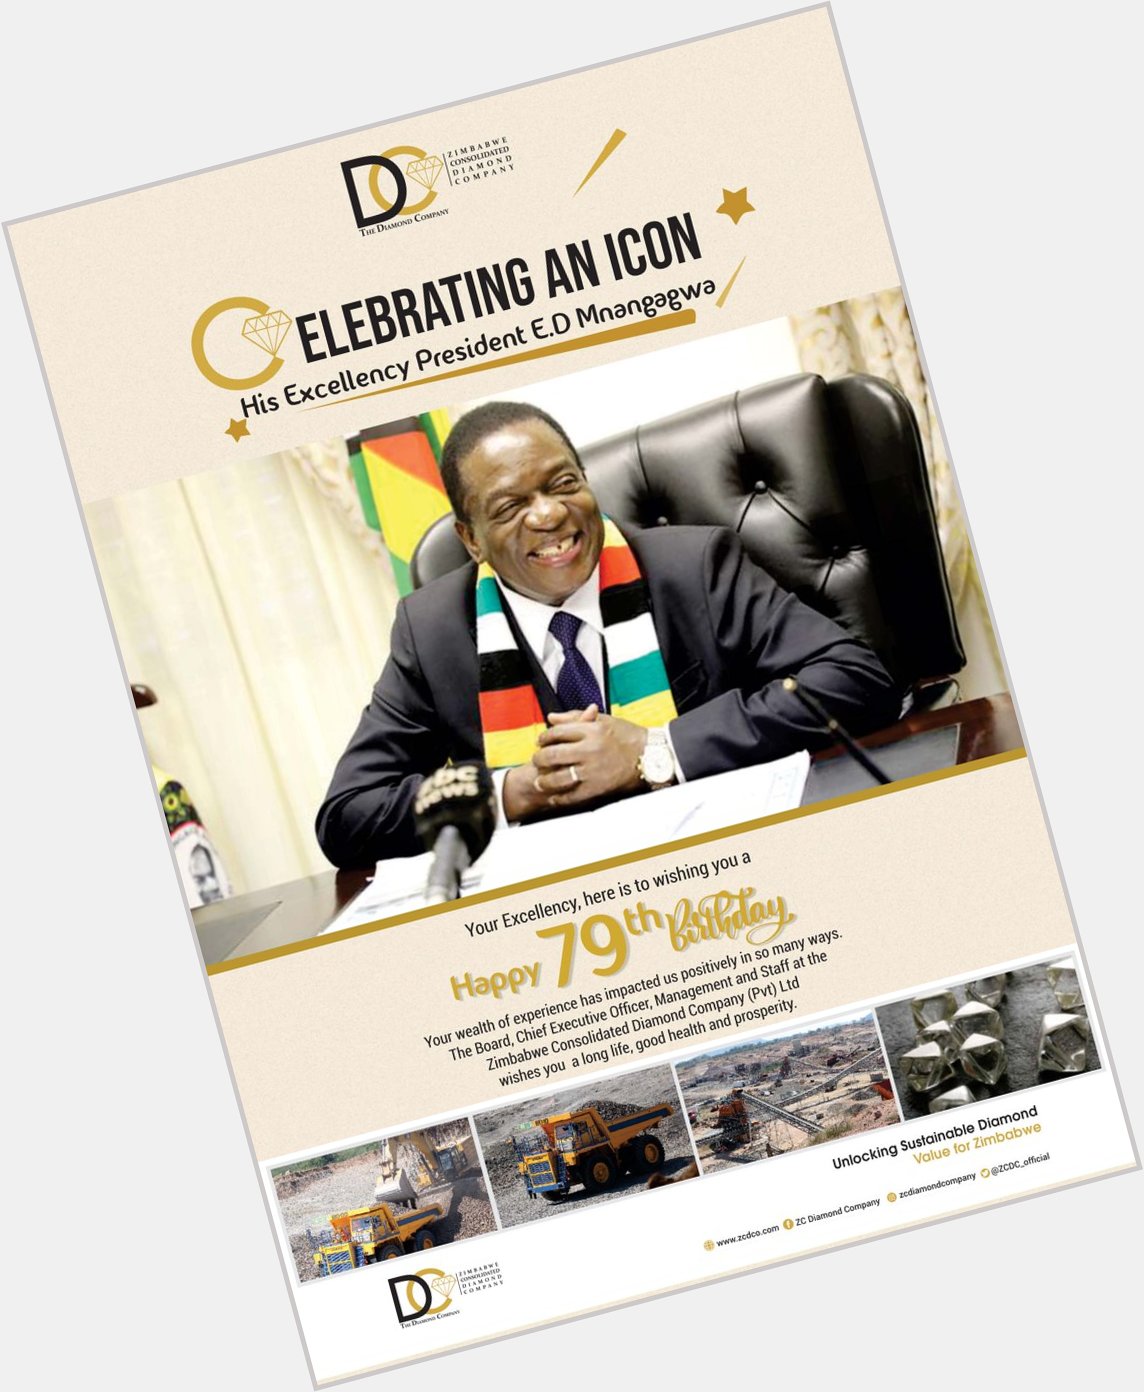 Happy Birthday to His Excellency Cde. Emmerson Mnangagwa. 